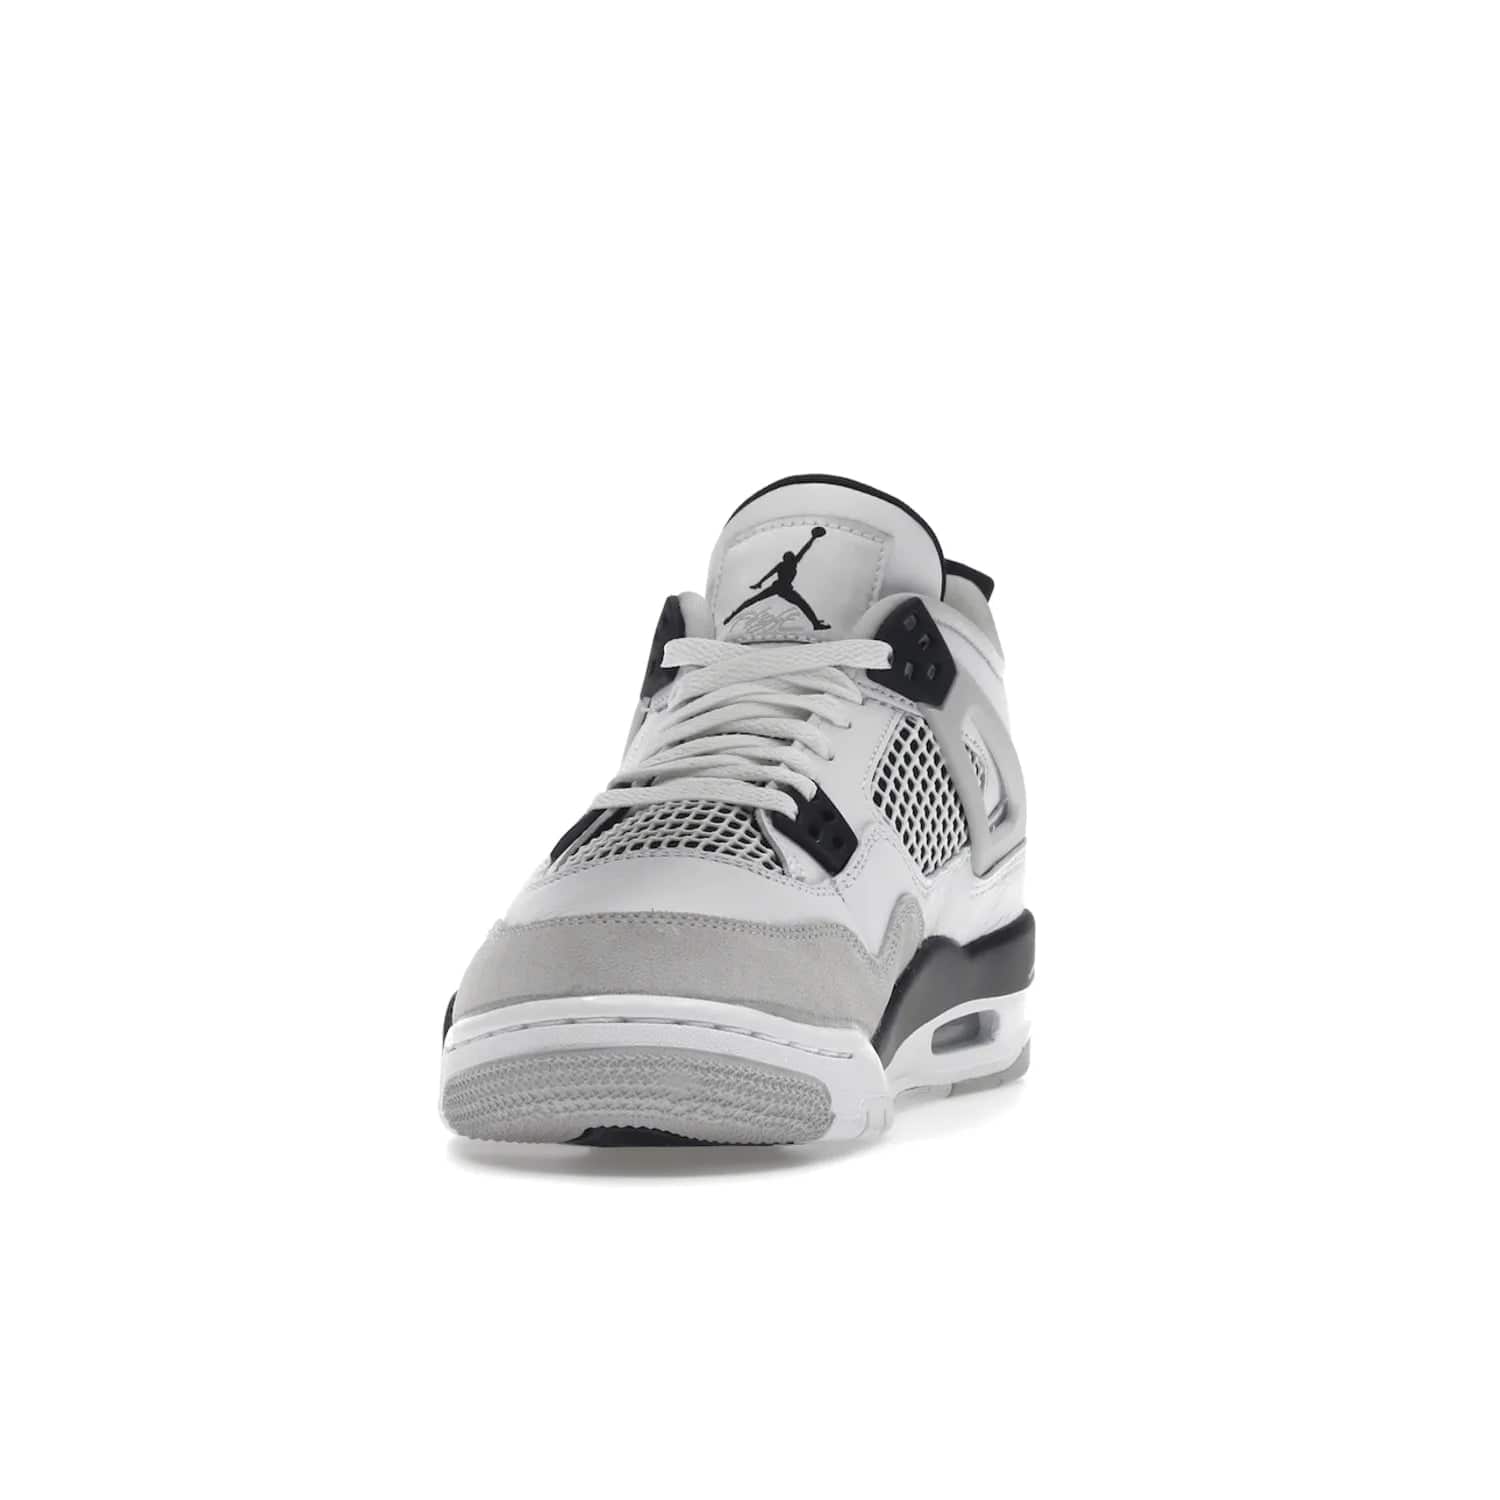 Jordan 4 Retro Military Black (GS) - Image 12 - Only at www.BallersClubKickz.com - A must-have for grade schoolers, the Air Jordan 4 Retro Military Black (GS) offers classic style with plenty of breathable support. Featuring a white sole and base with suede and leather overlays in subtle black and grey tones, the shoes are perfect for active pursuits and everyday comfort. Get an instant classic today!